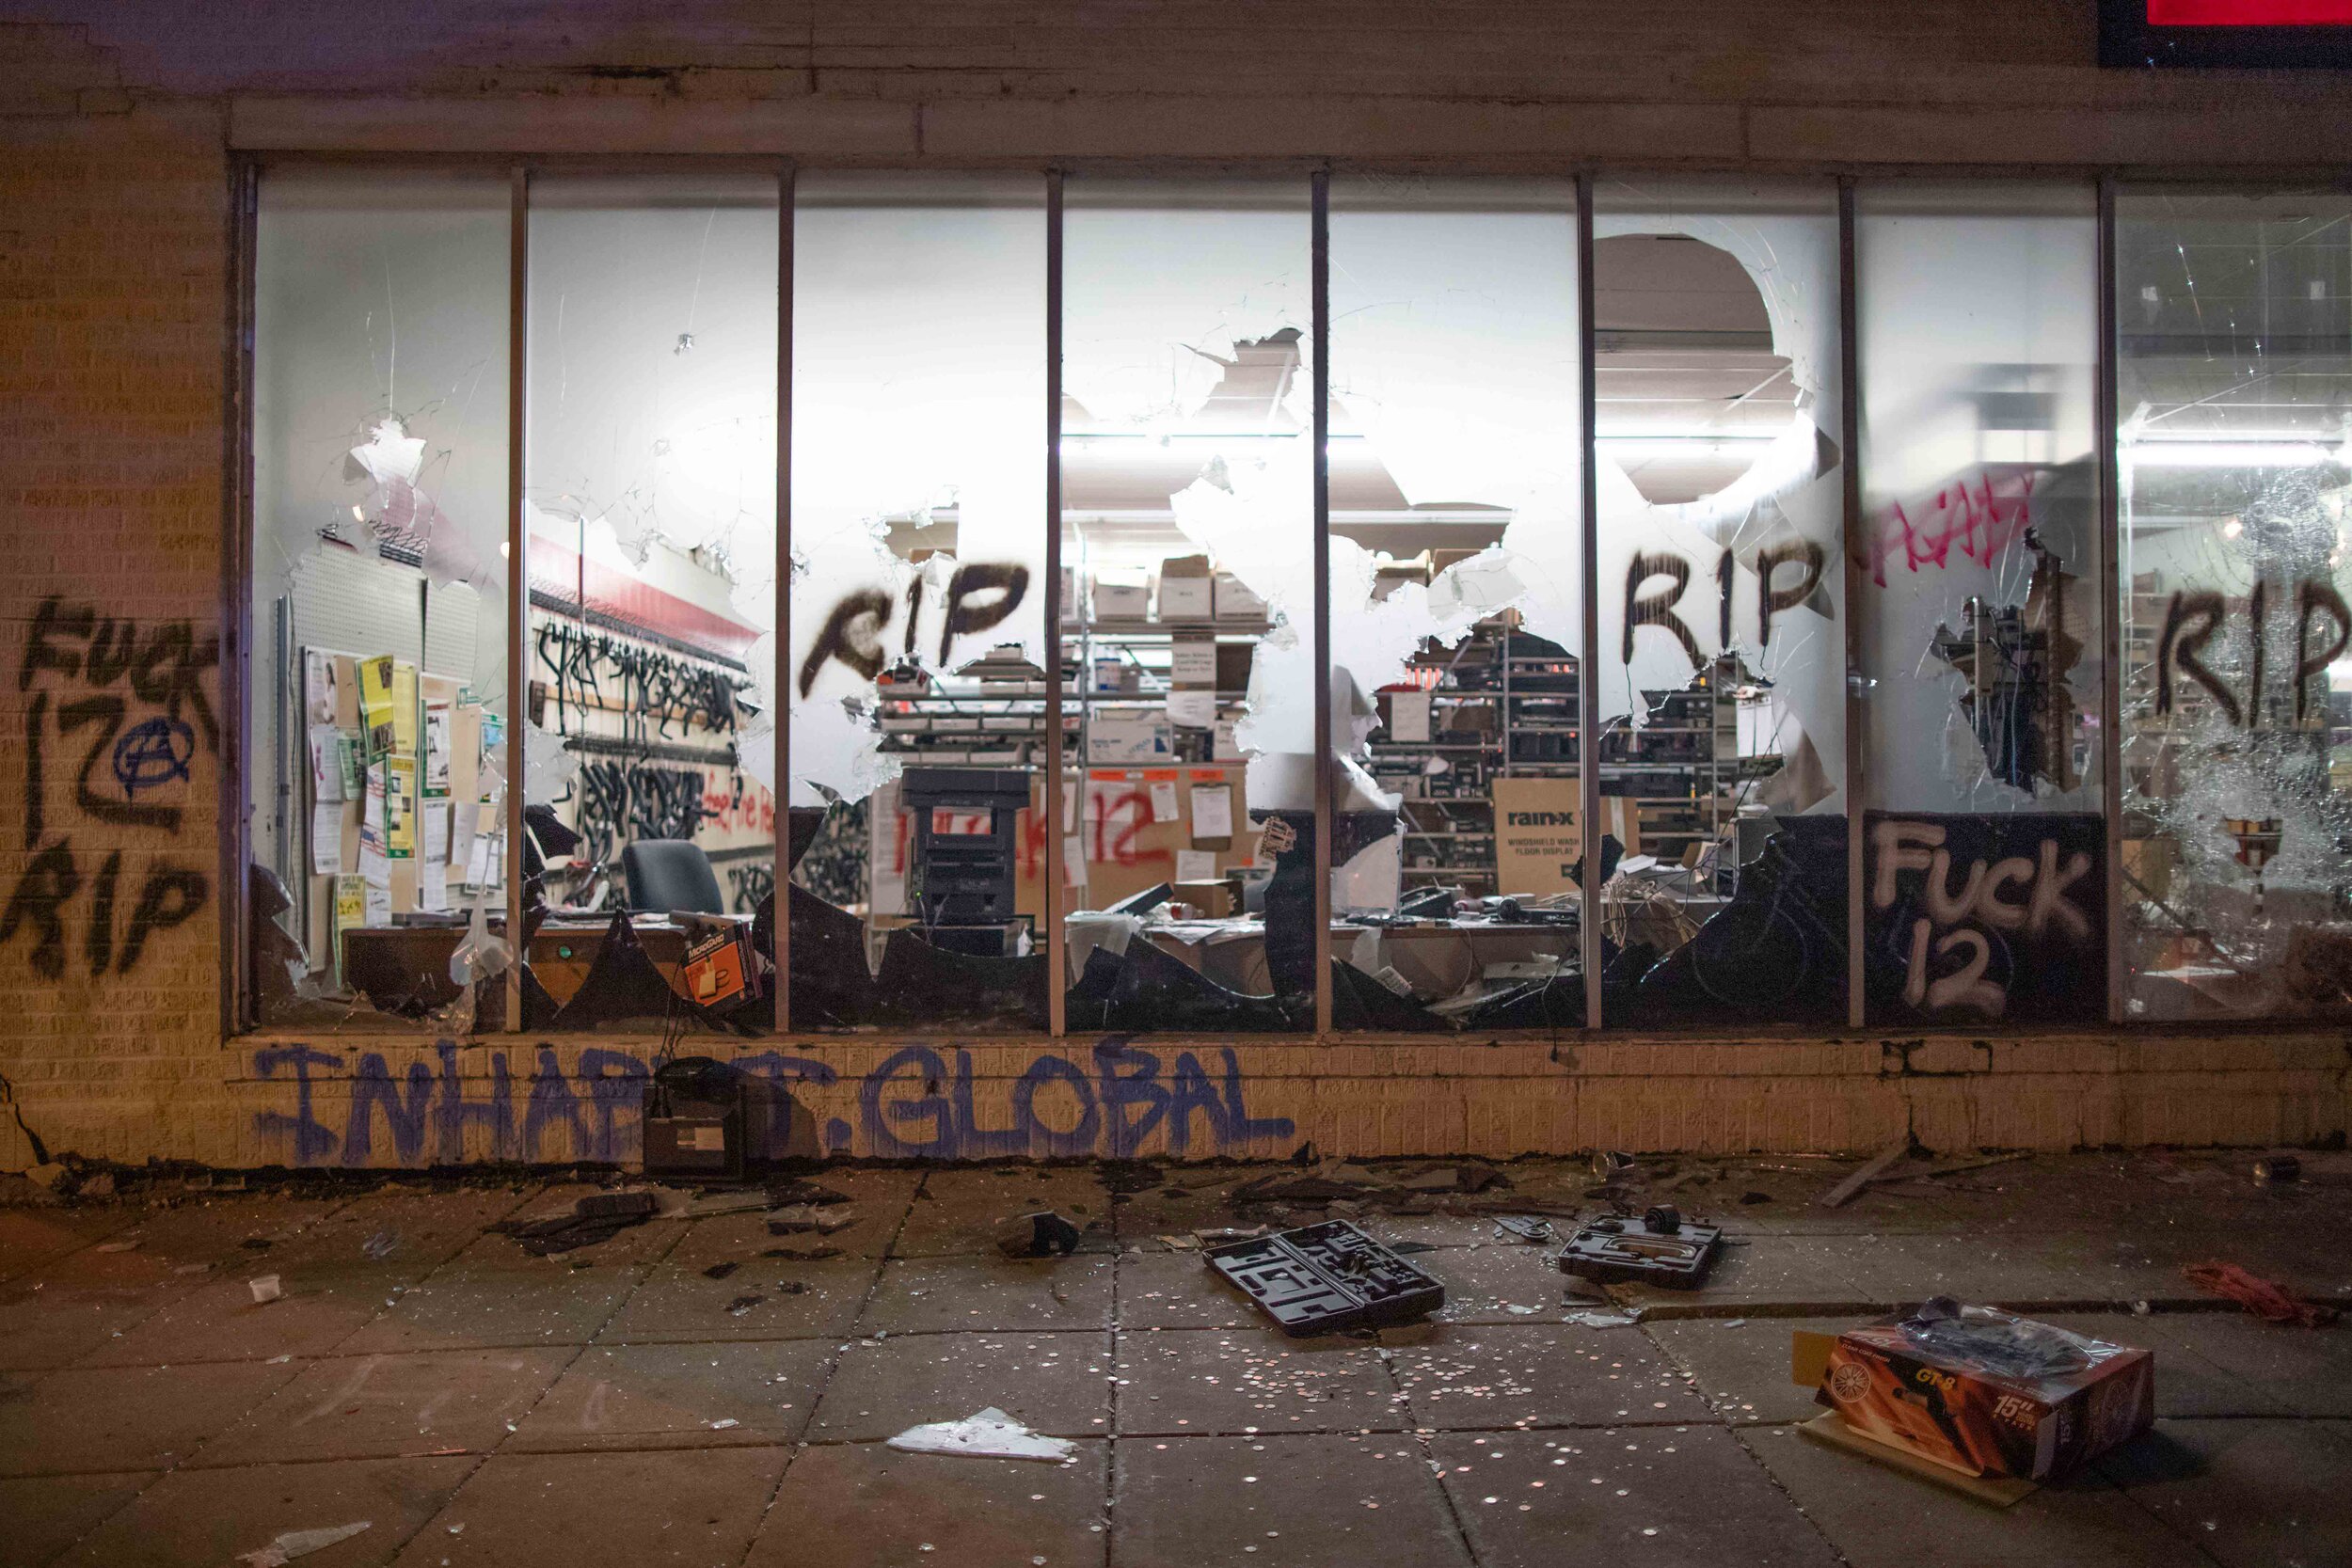  The windows of an O'Reily Auto Parts in Minneapolis sit mostly shattered with graffiti on parts of it. Looters broke into the store during a riot over the police killing of George Floyd in Minneapolis, Minnesota on May 28. 